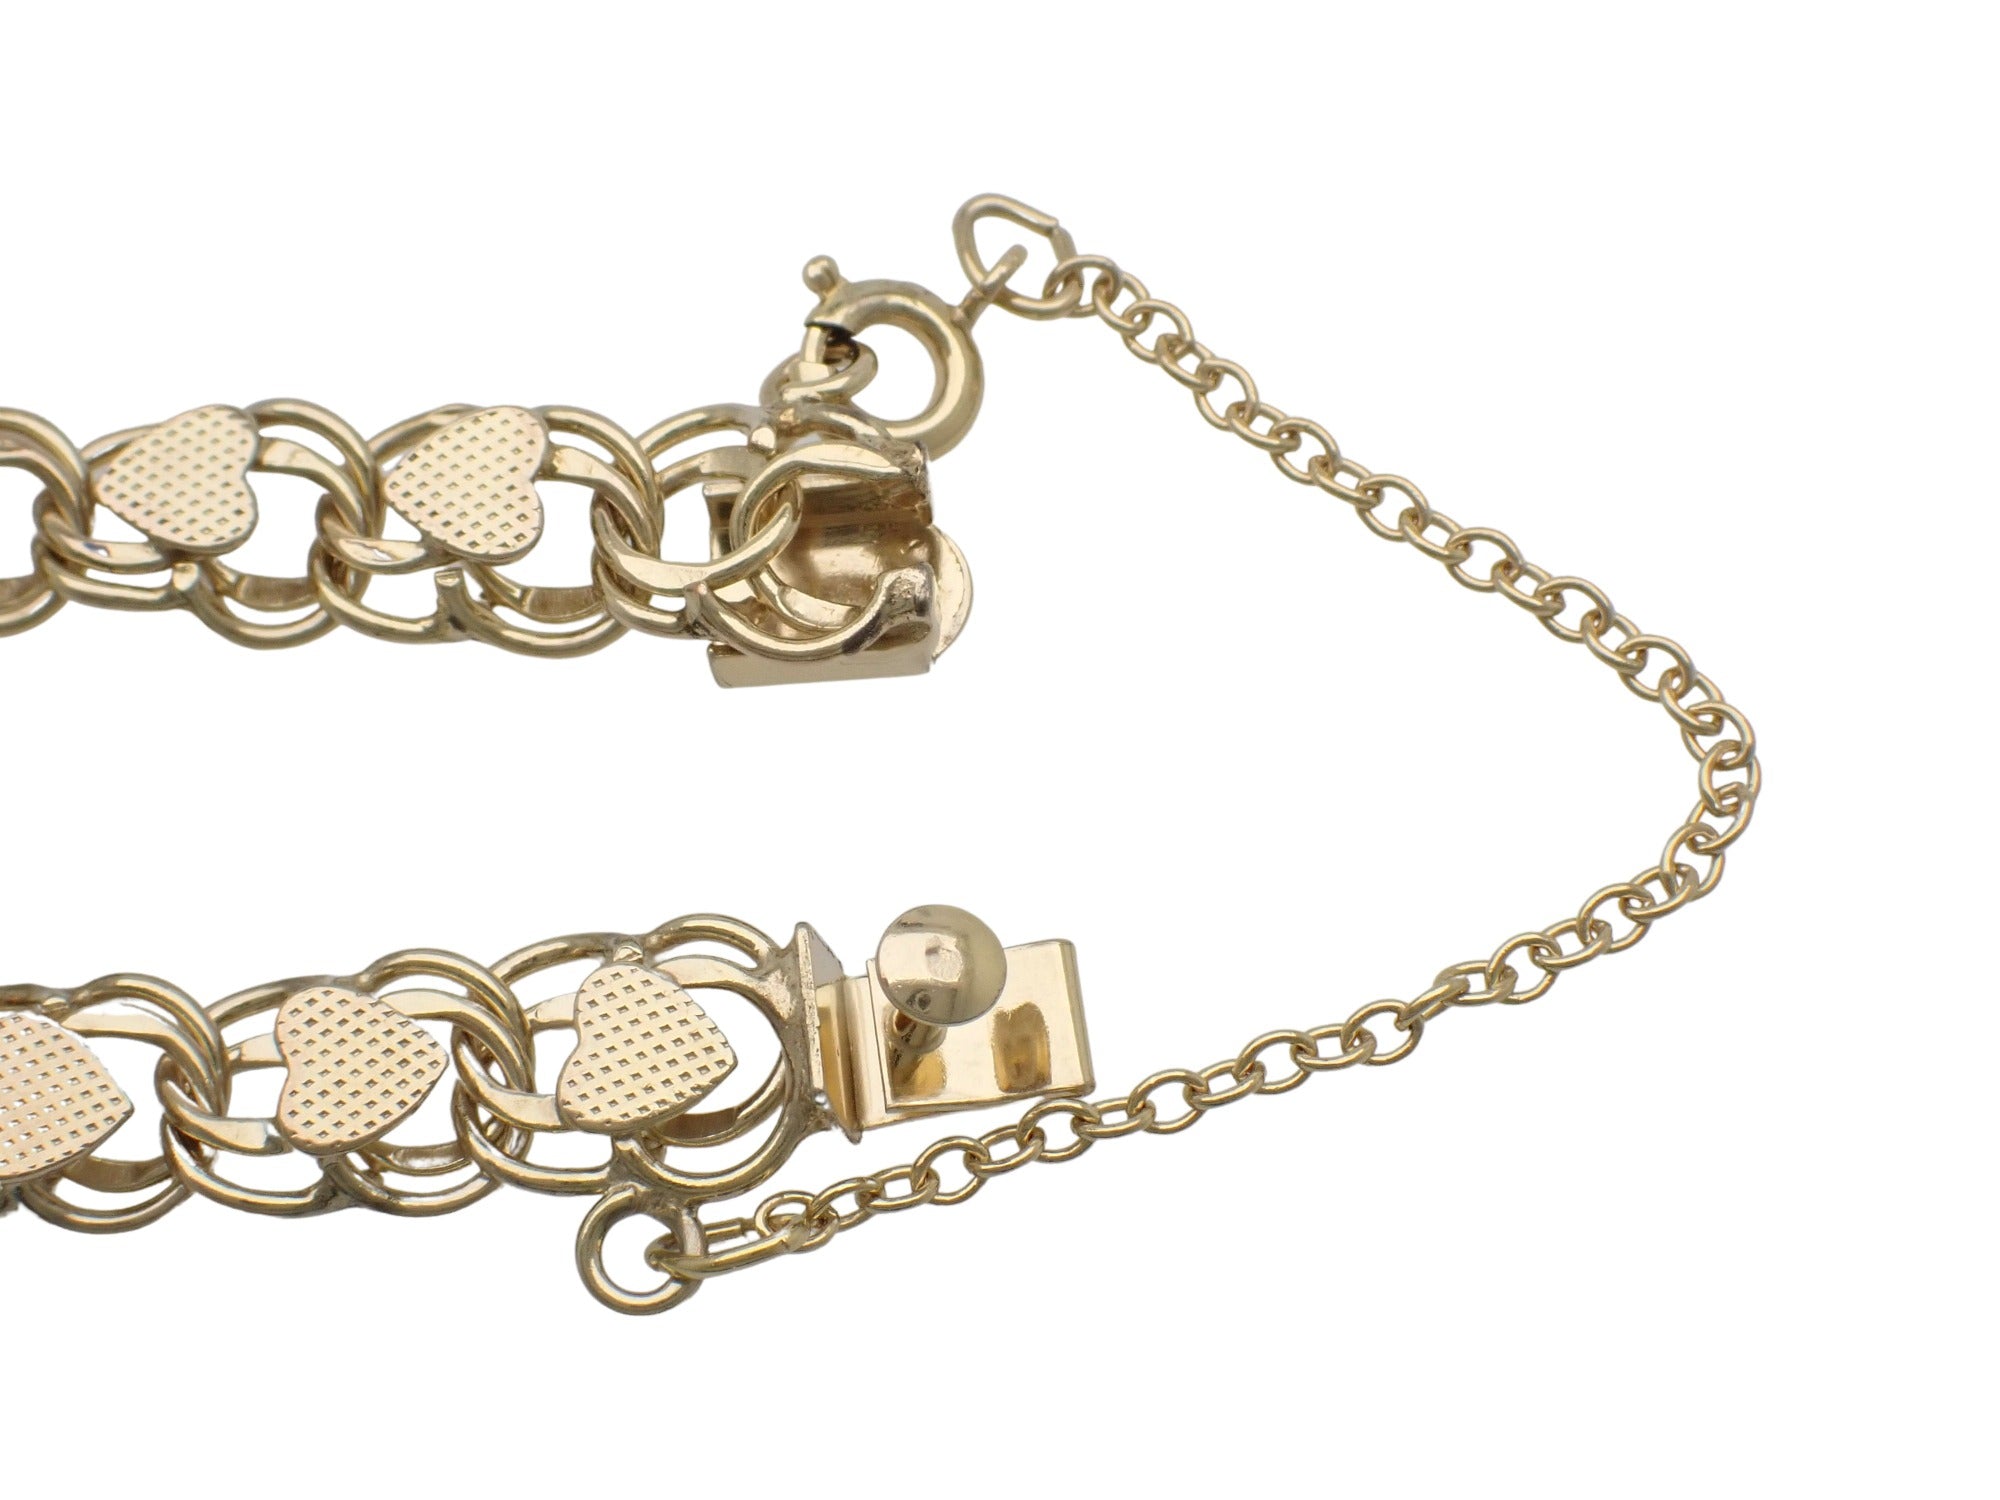 Linked Hearts 1960's Vintage 12K Yellow Gold Filled Double Link Charm Bracelet - 7 Inches - Item: SSBR4 - Image: 4